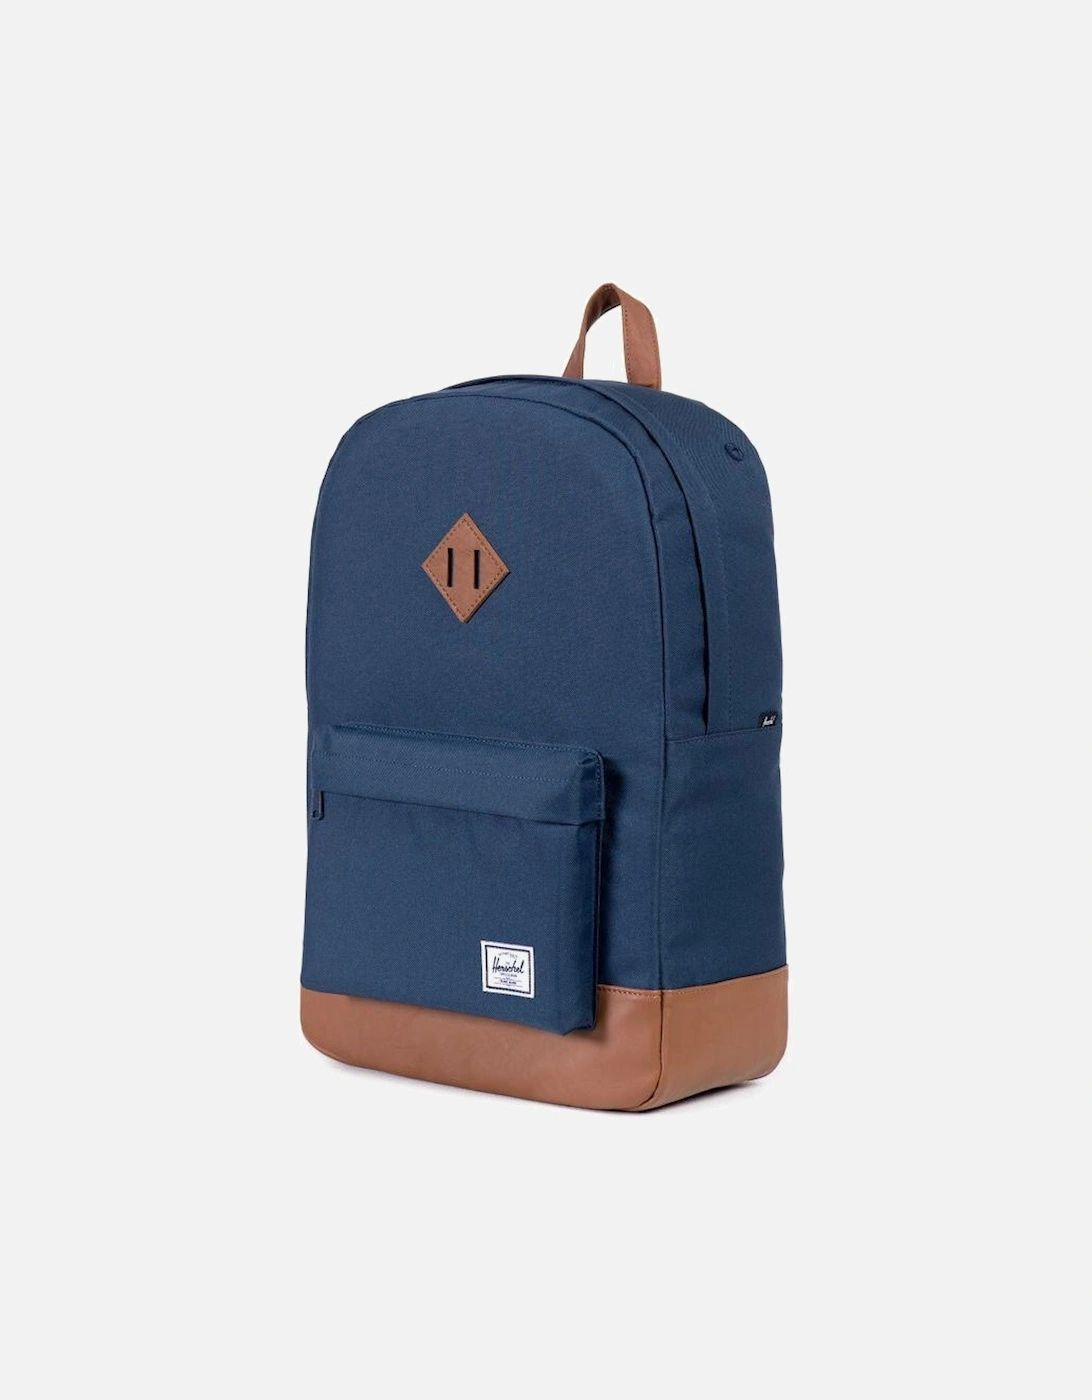 Supply Co Heritage Backpack - Navy / Tan